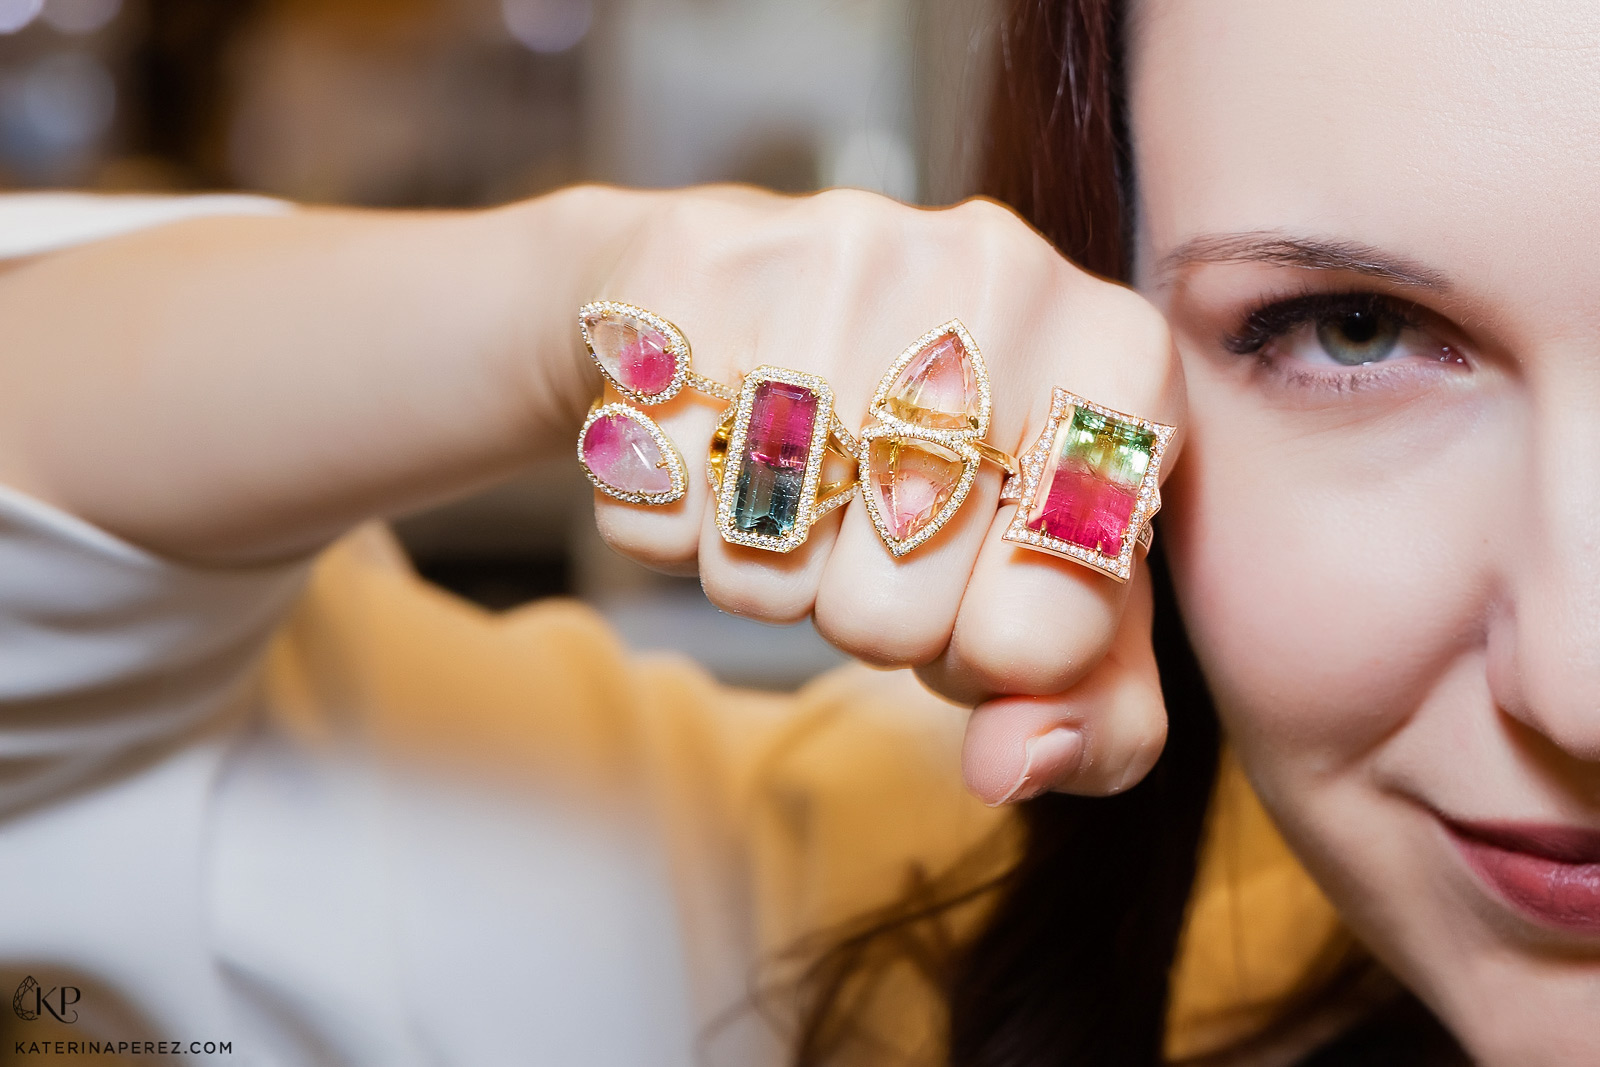 Lauren K watermelon tourmaline rings with centre stones of 8.26 cts, 8.88 cts, 6.45 cts and 15.93 cts. Photo by Simon Martner.